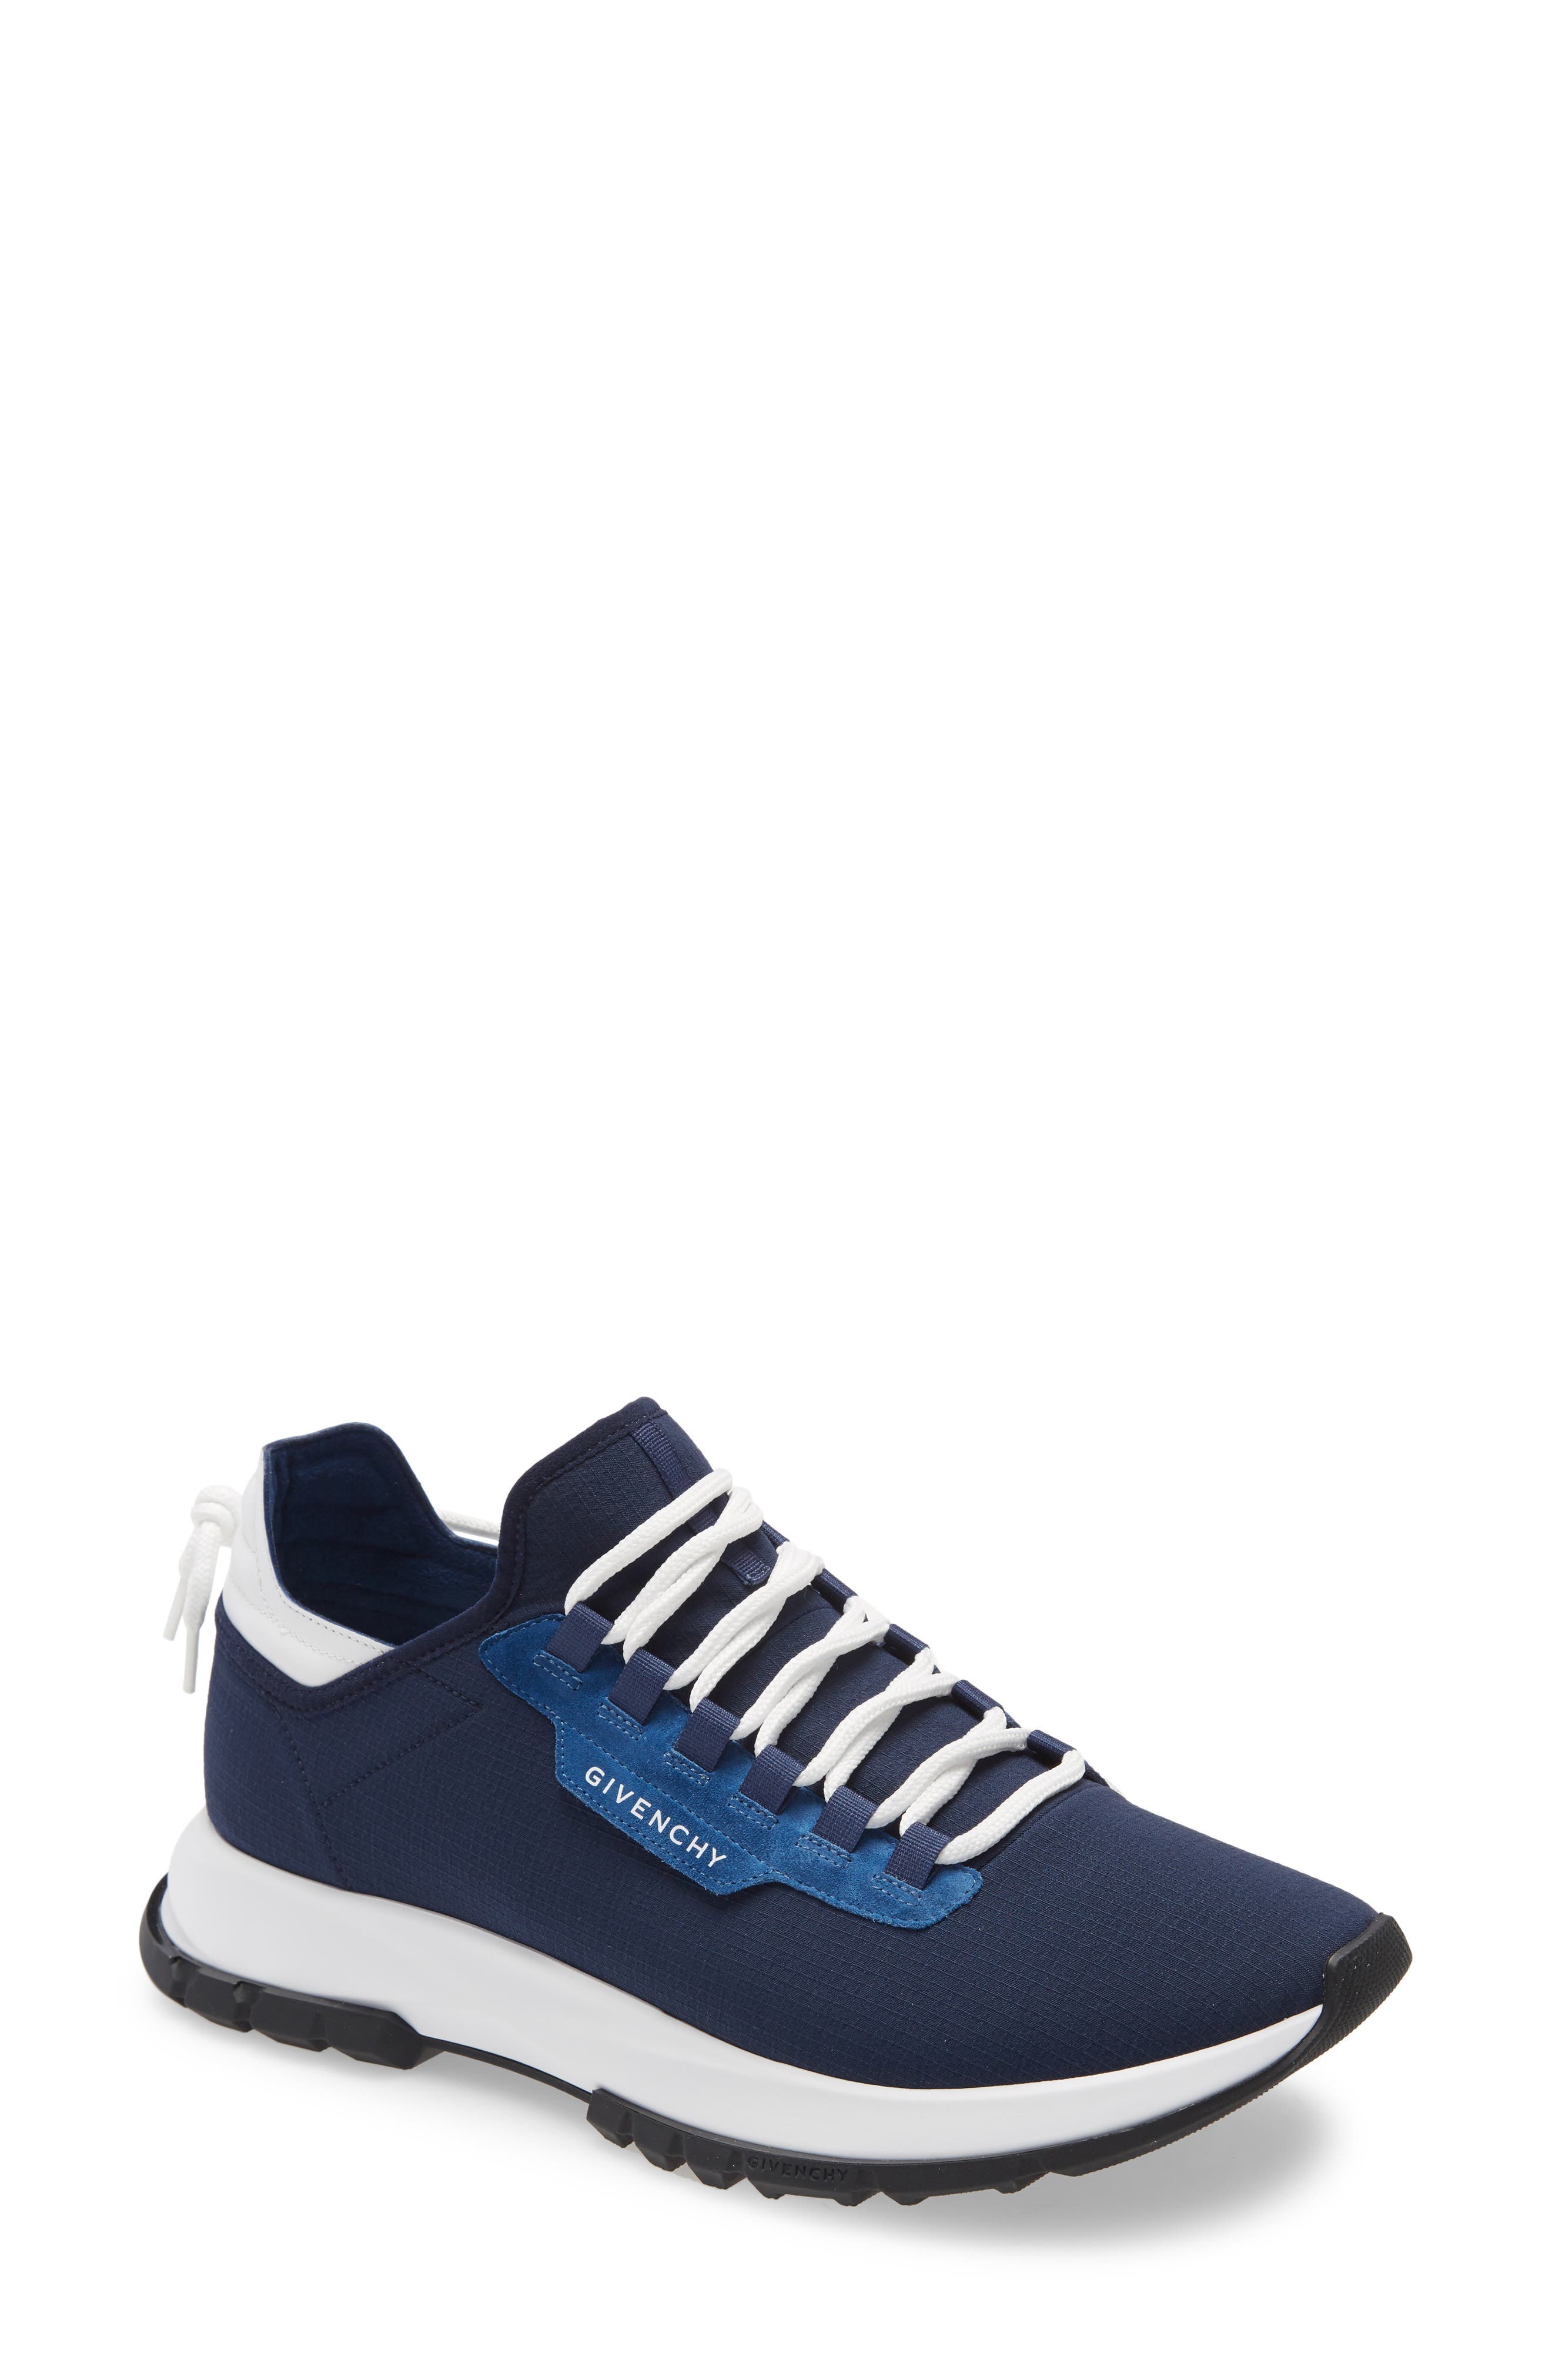 white and blue designer shoes